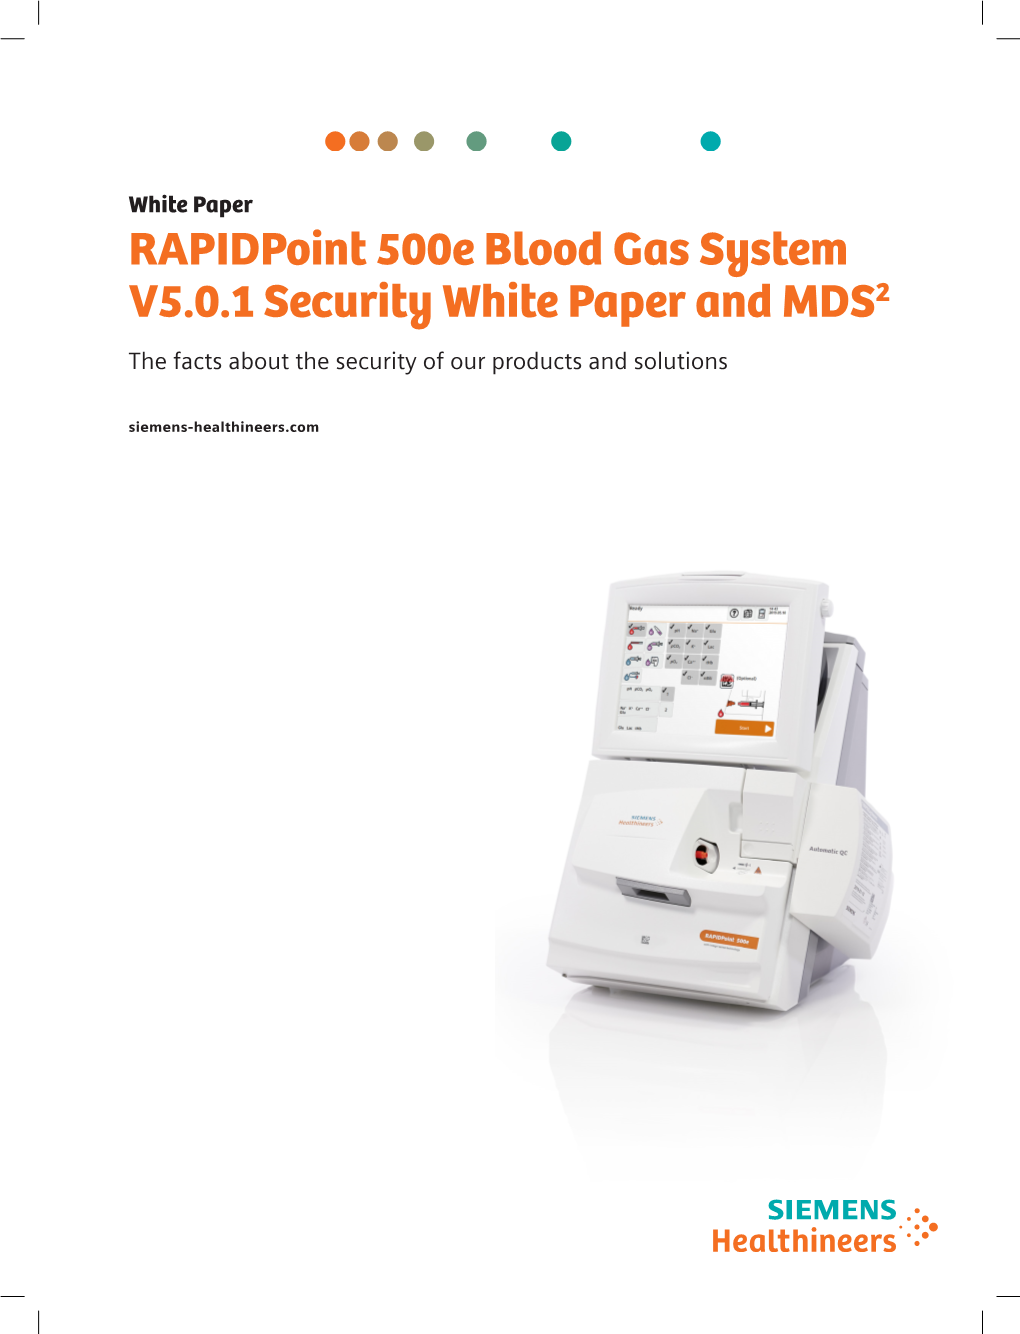 Rapidpoint 500E Blood Gas System V5.0.1 Security White Paper and MDS2 the Facts About the Security of Our Products and Solutions